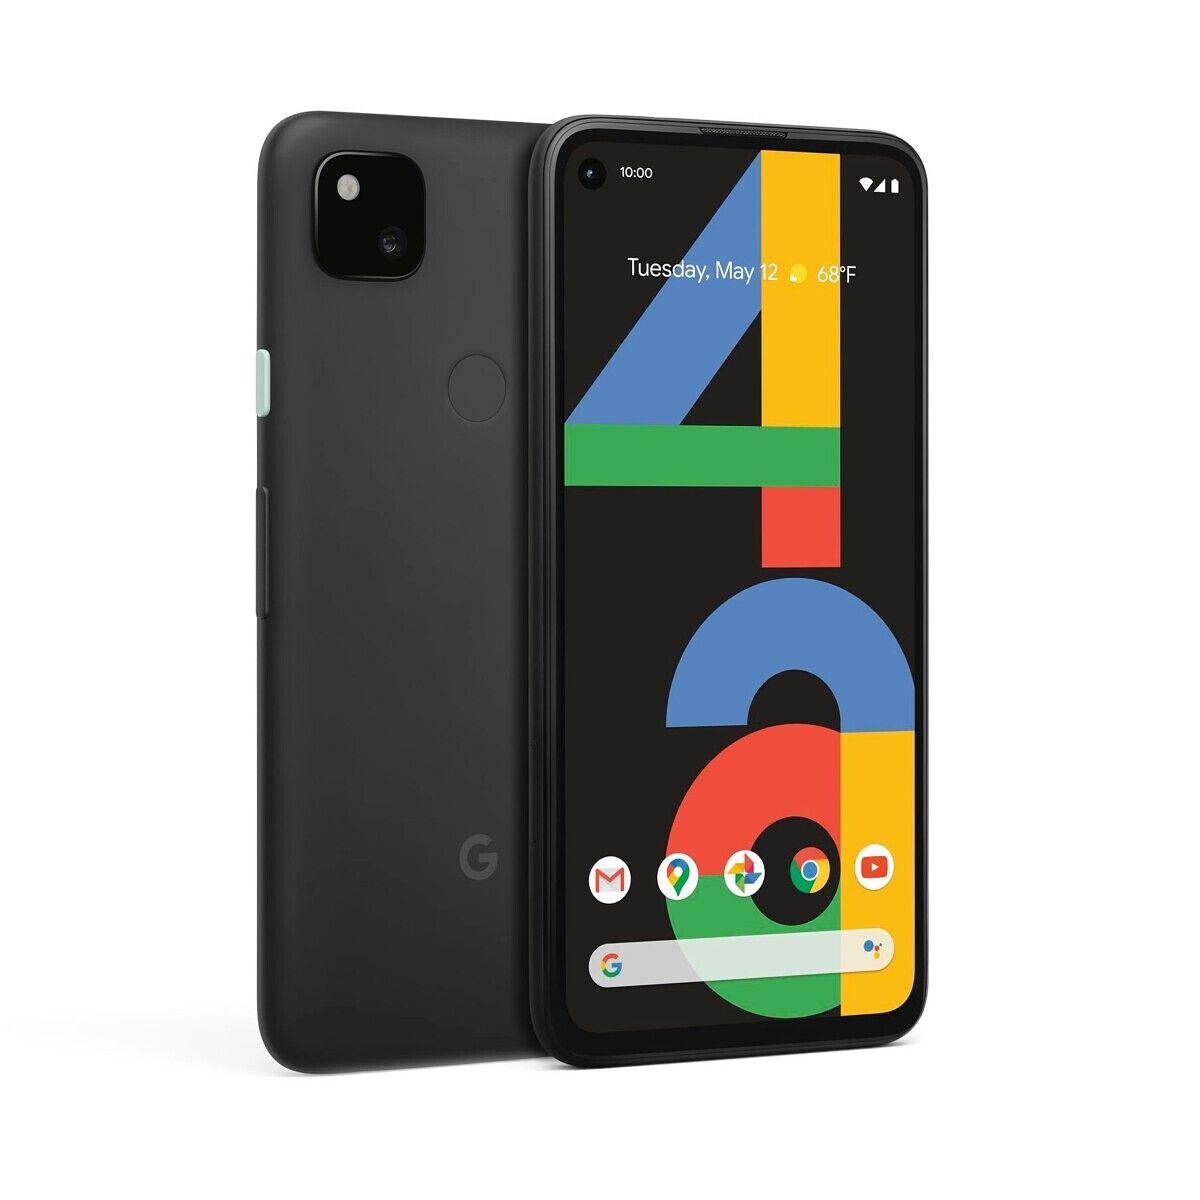 The Google Pixel 4a is a new launch for India, bringing the best of Google's camera experience at a decent price.